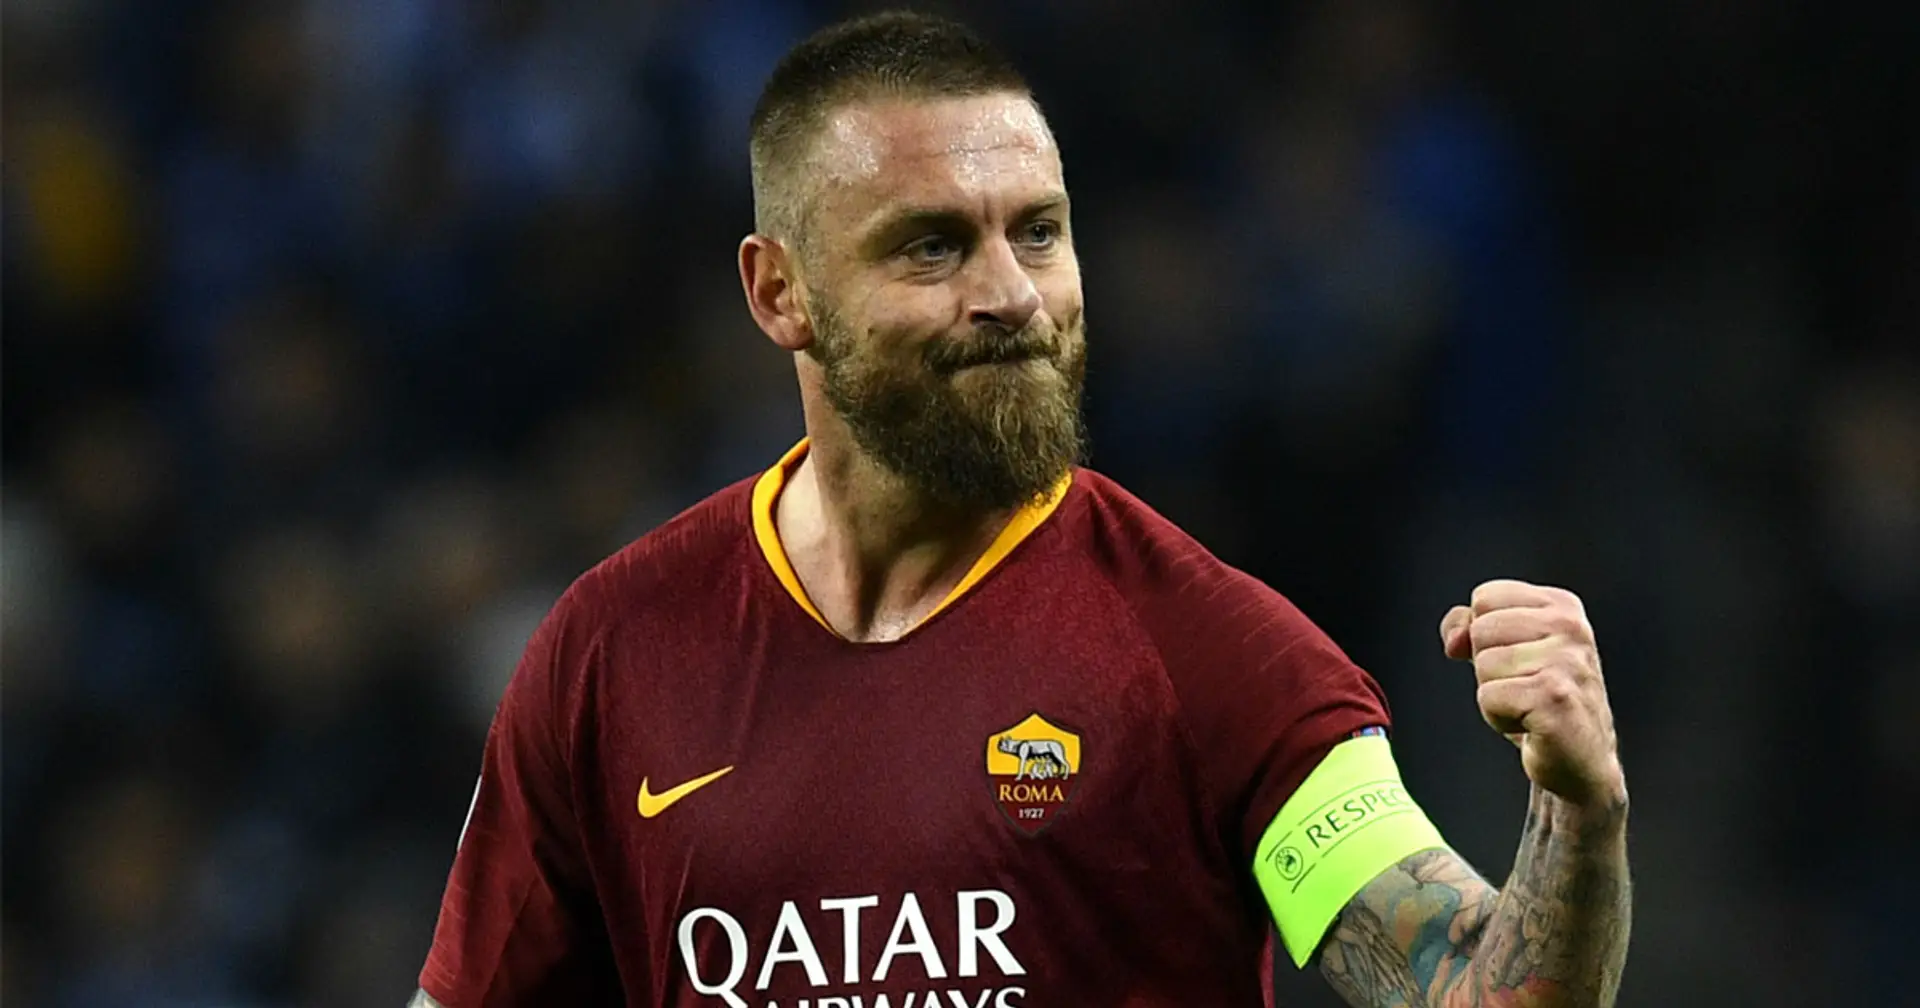 ‘I’ve always loved them since I was a kid’: Roma legend Daniele De Rossi reveals he wished to play for United